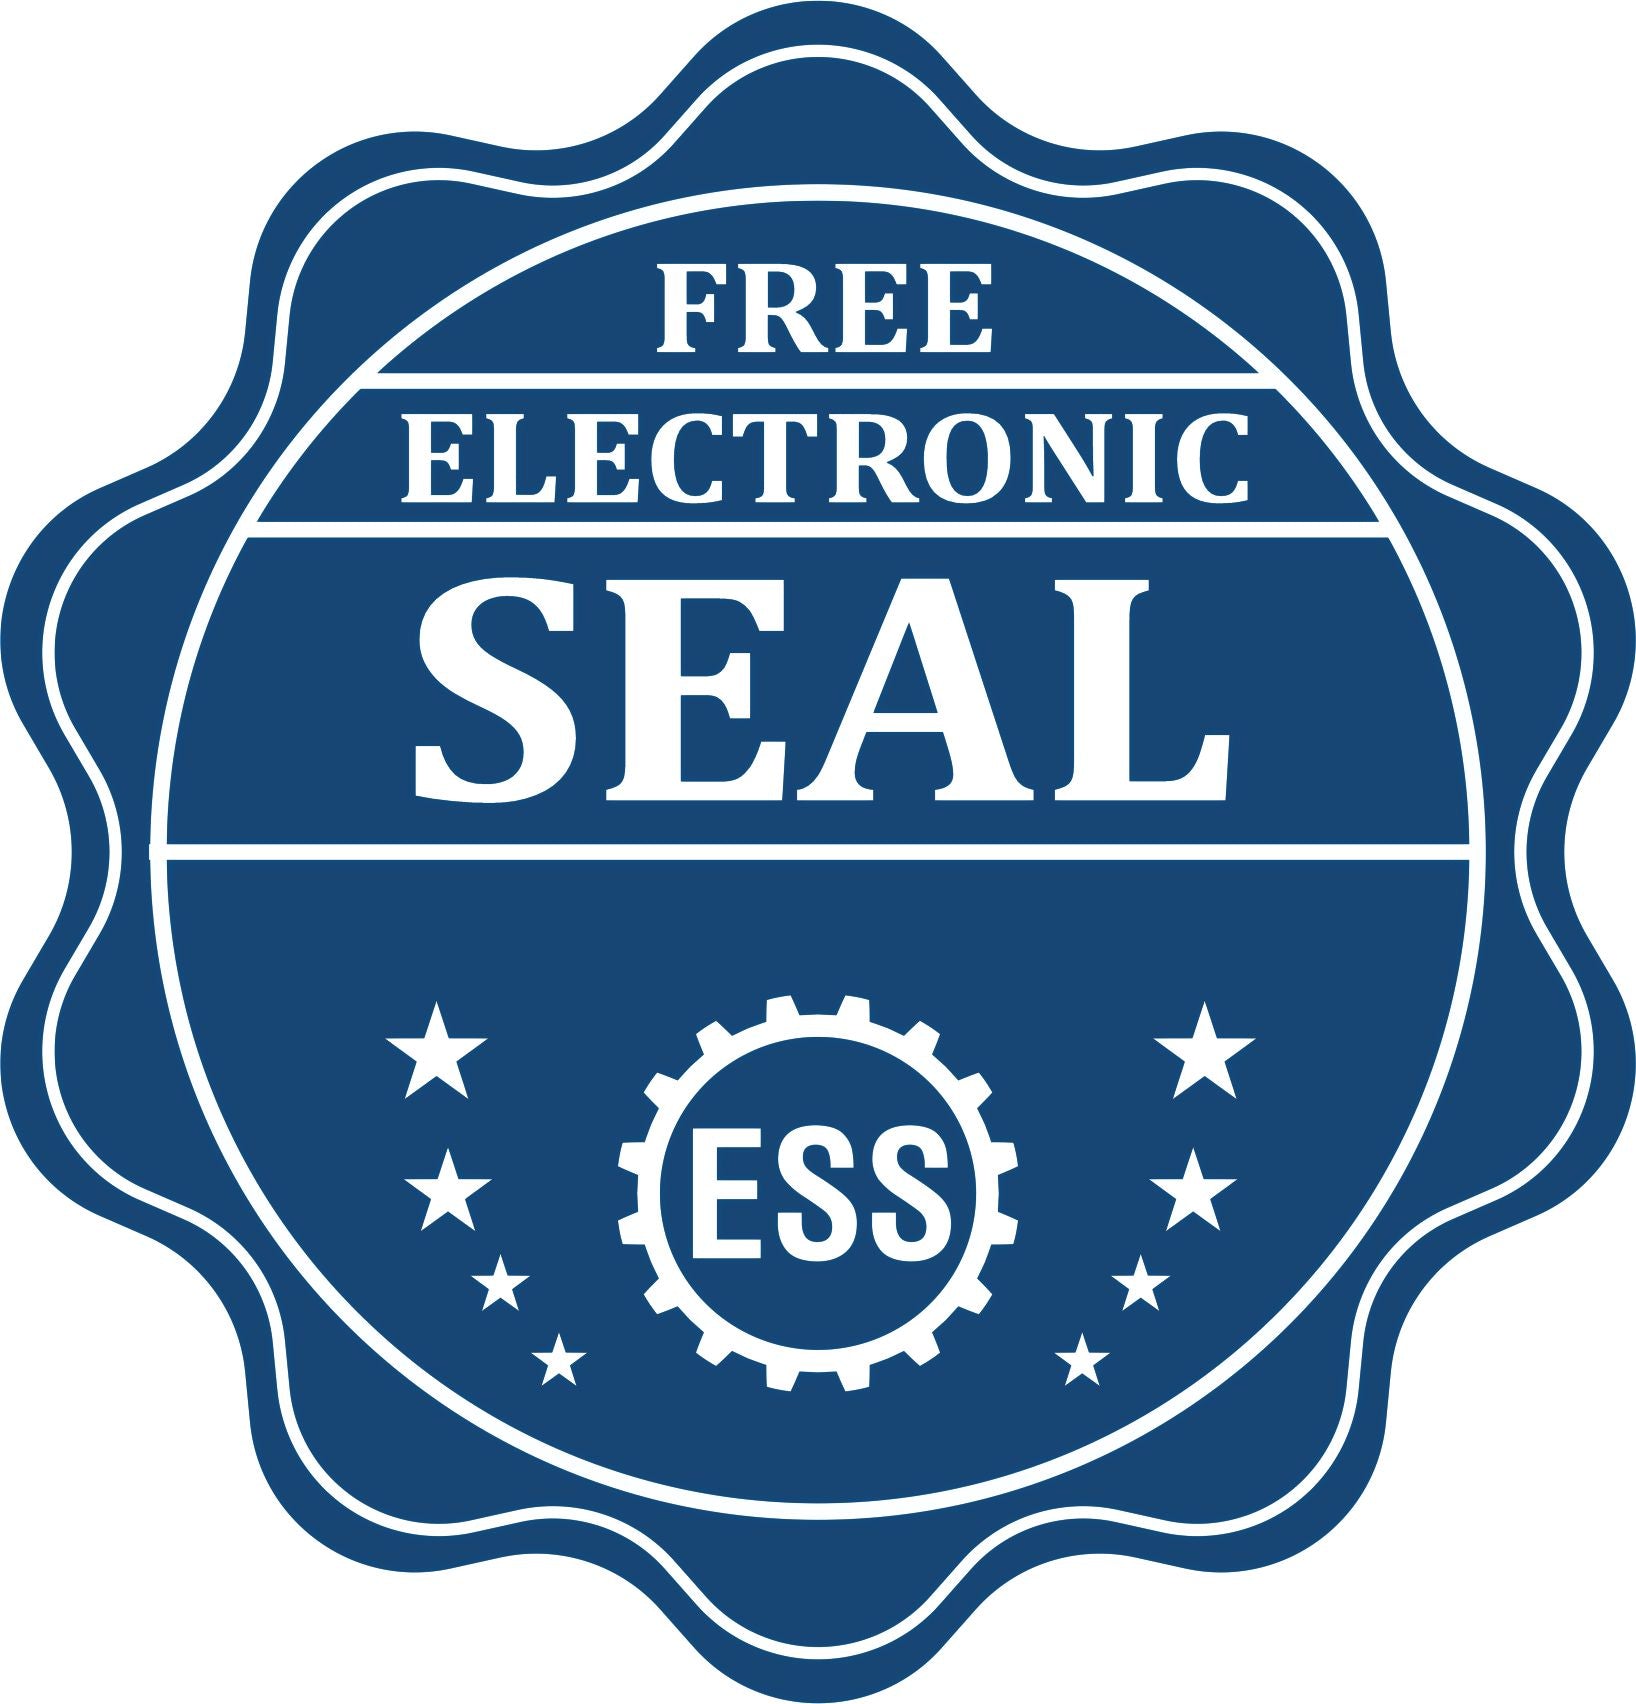 A badge showing a free electronic seal for the Soft Pocket Hawaii Landscape Architect Embosser with stars and the ESS gear on the emblem.